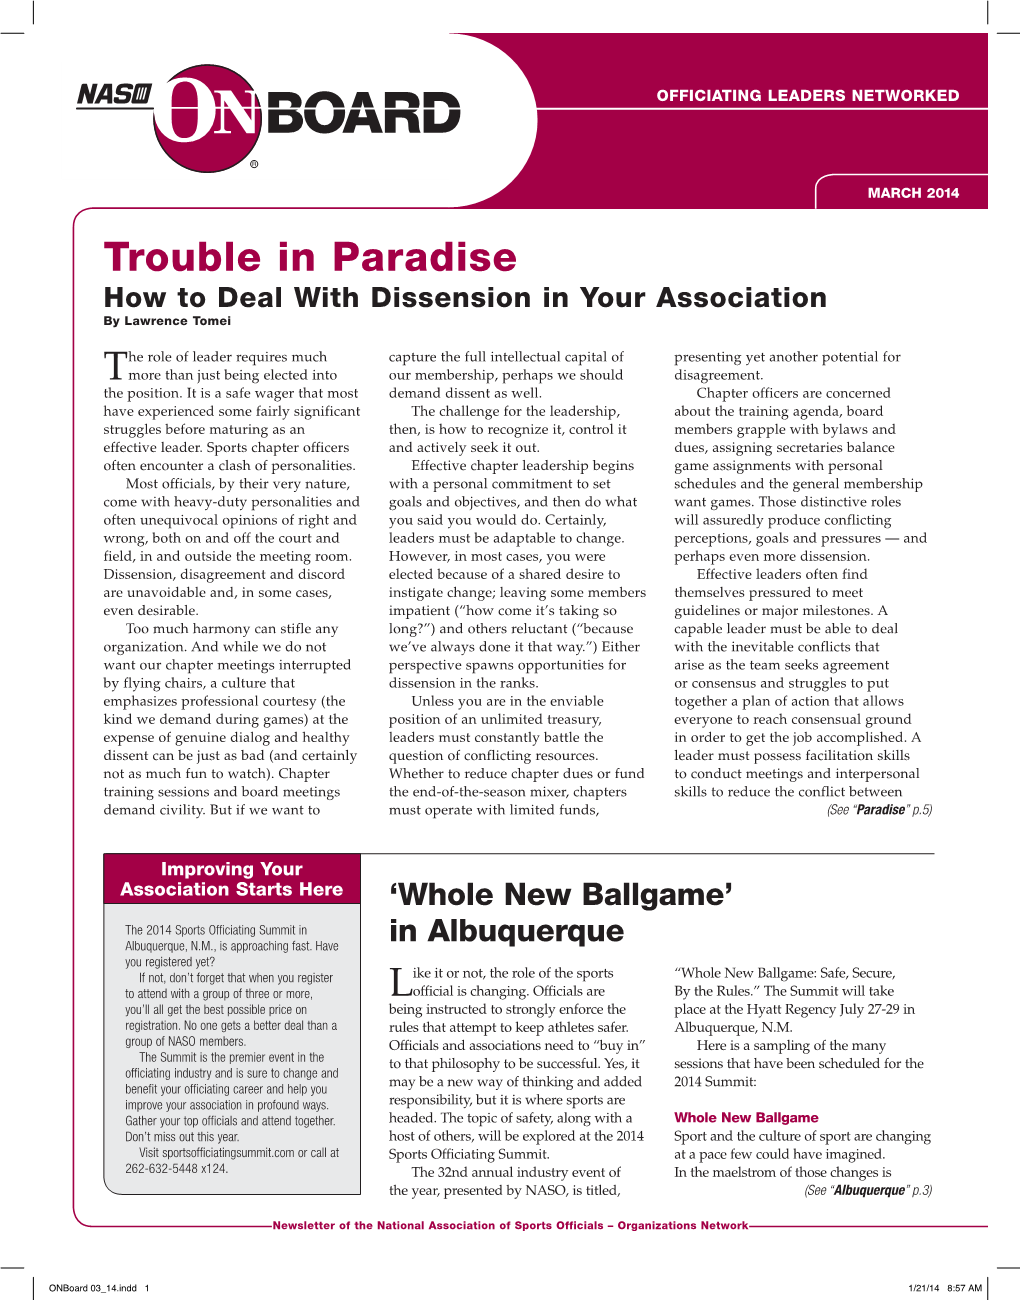 Trouble in Paradise How to Deal with Dissension in Your Association by Lawrence Tomei